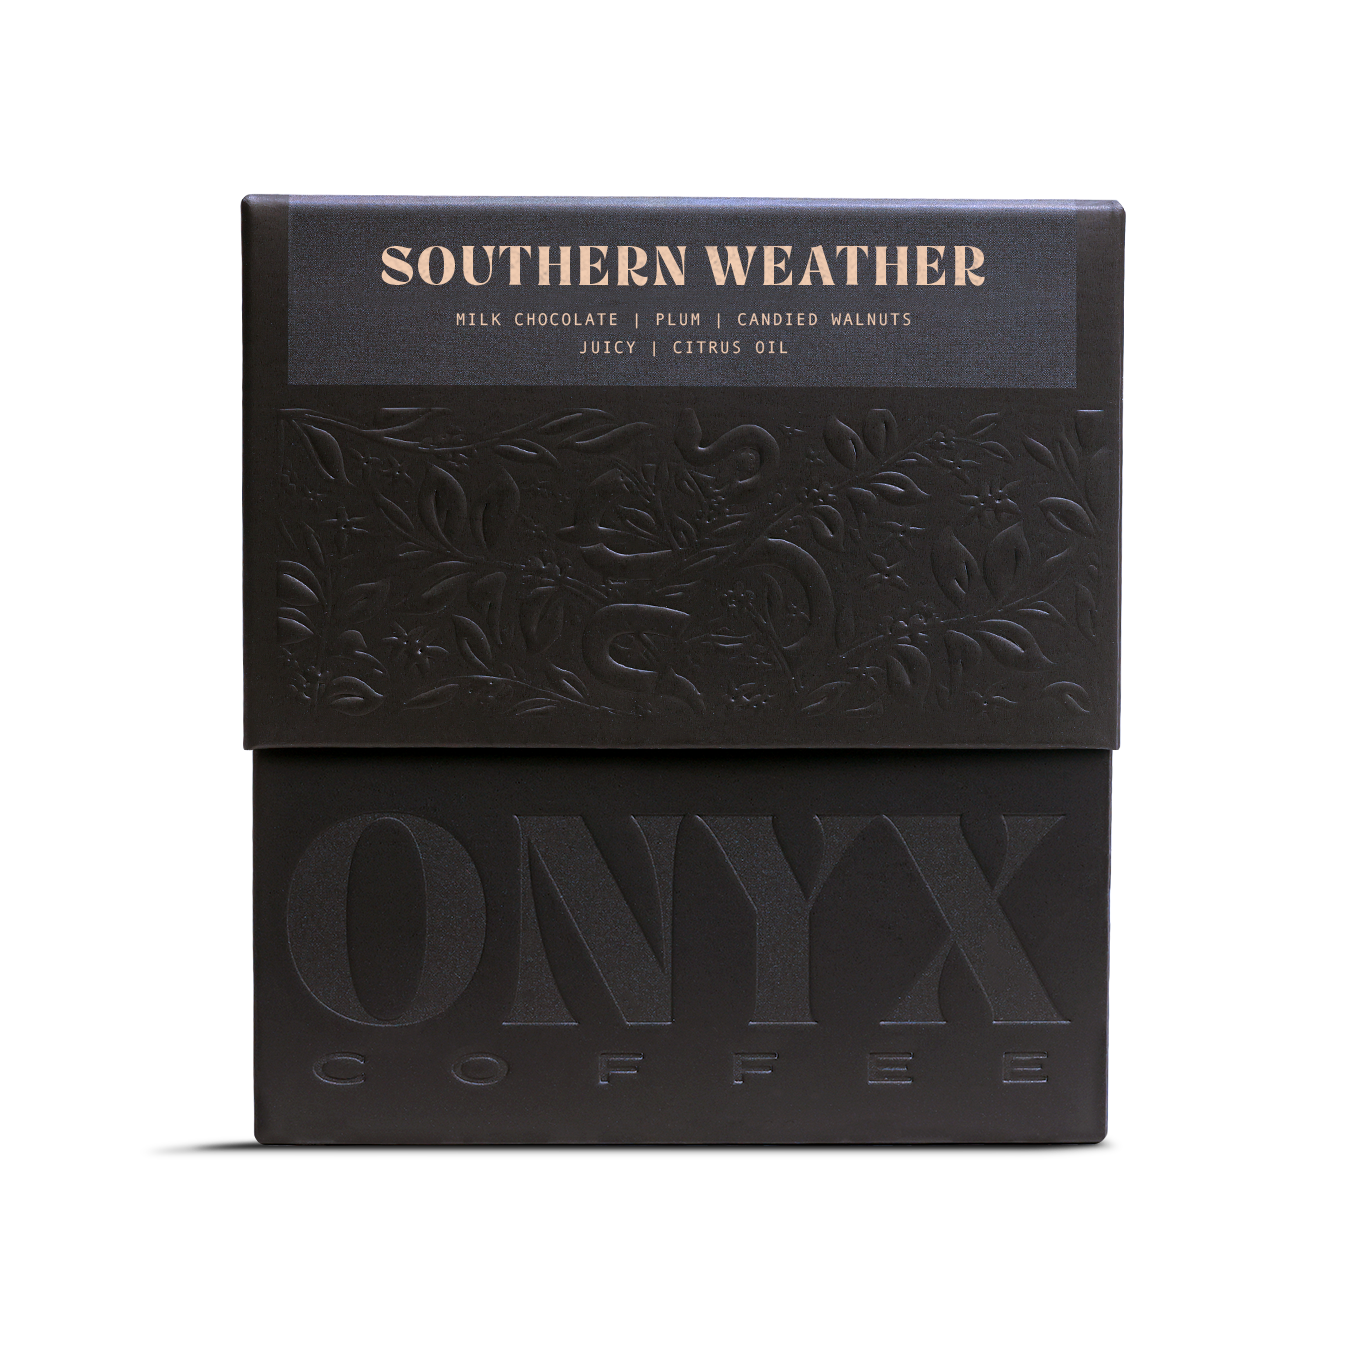 Southern Weather (Whole Bean) by Onyx Coffee Lab